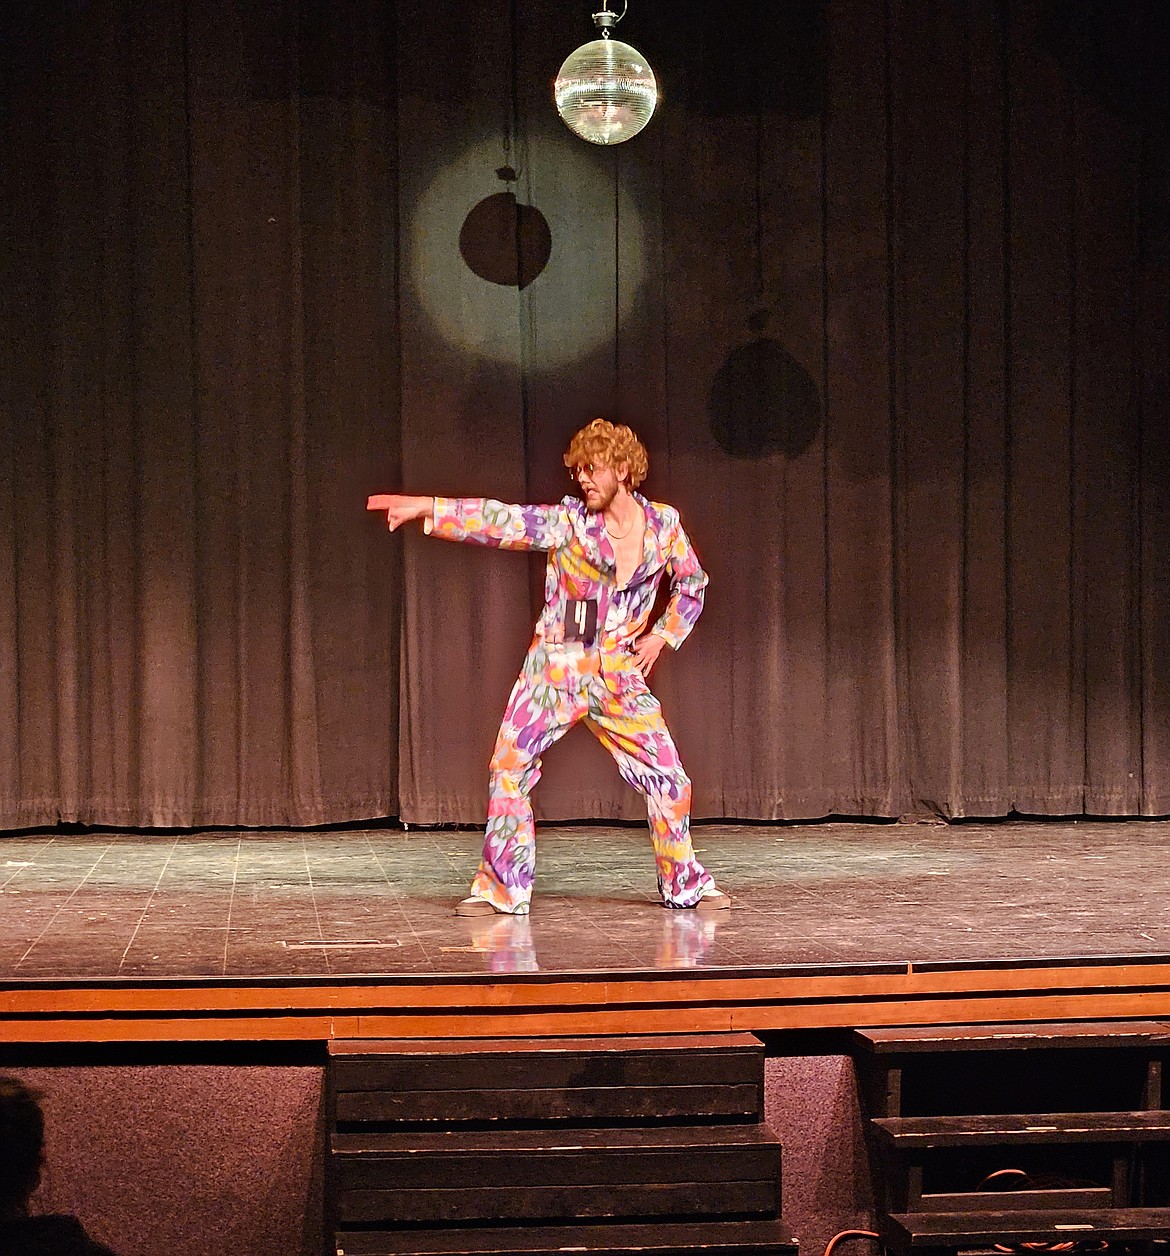 Aiden Beggerly showed off he groovy dance moves at Mr. BFHS, earning him second runner up.